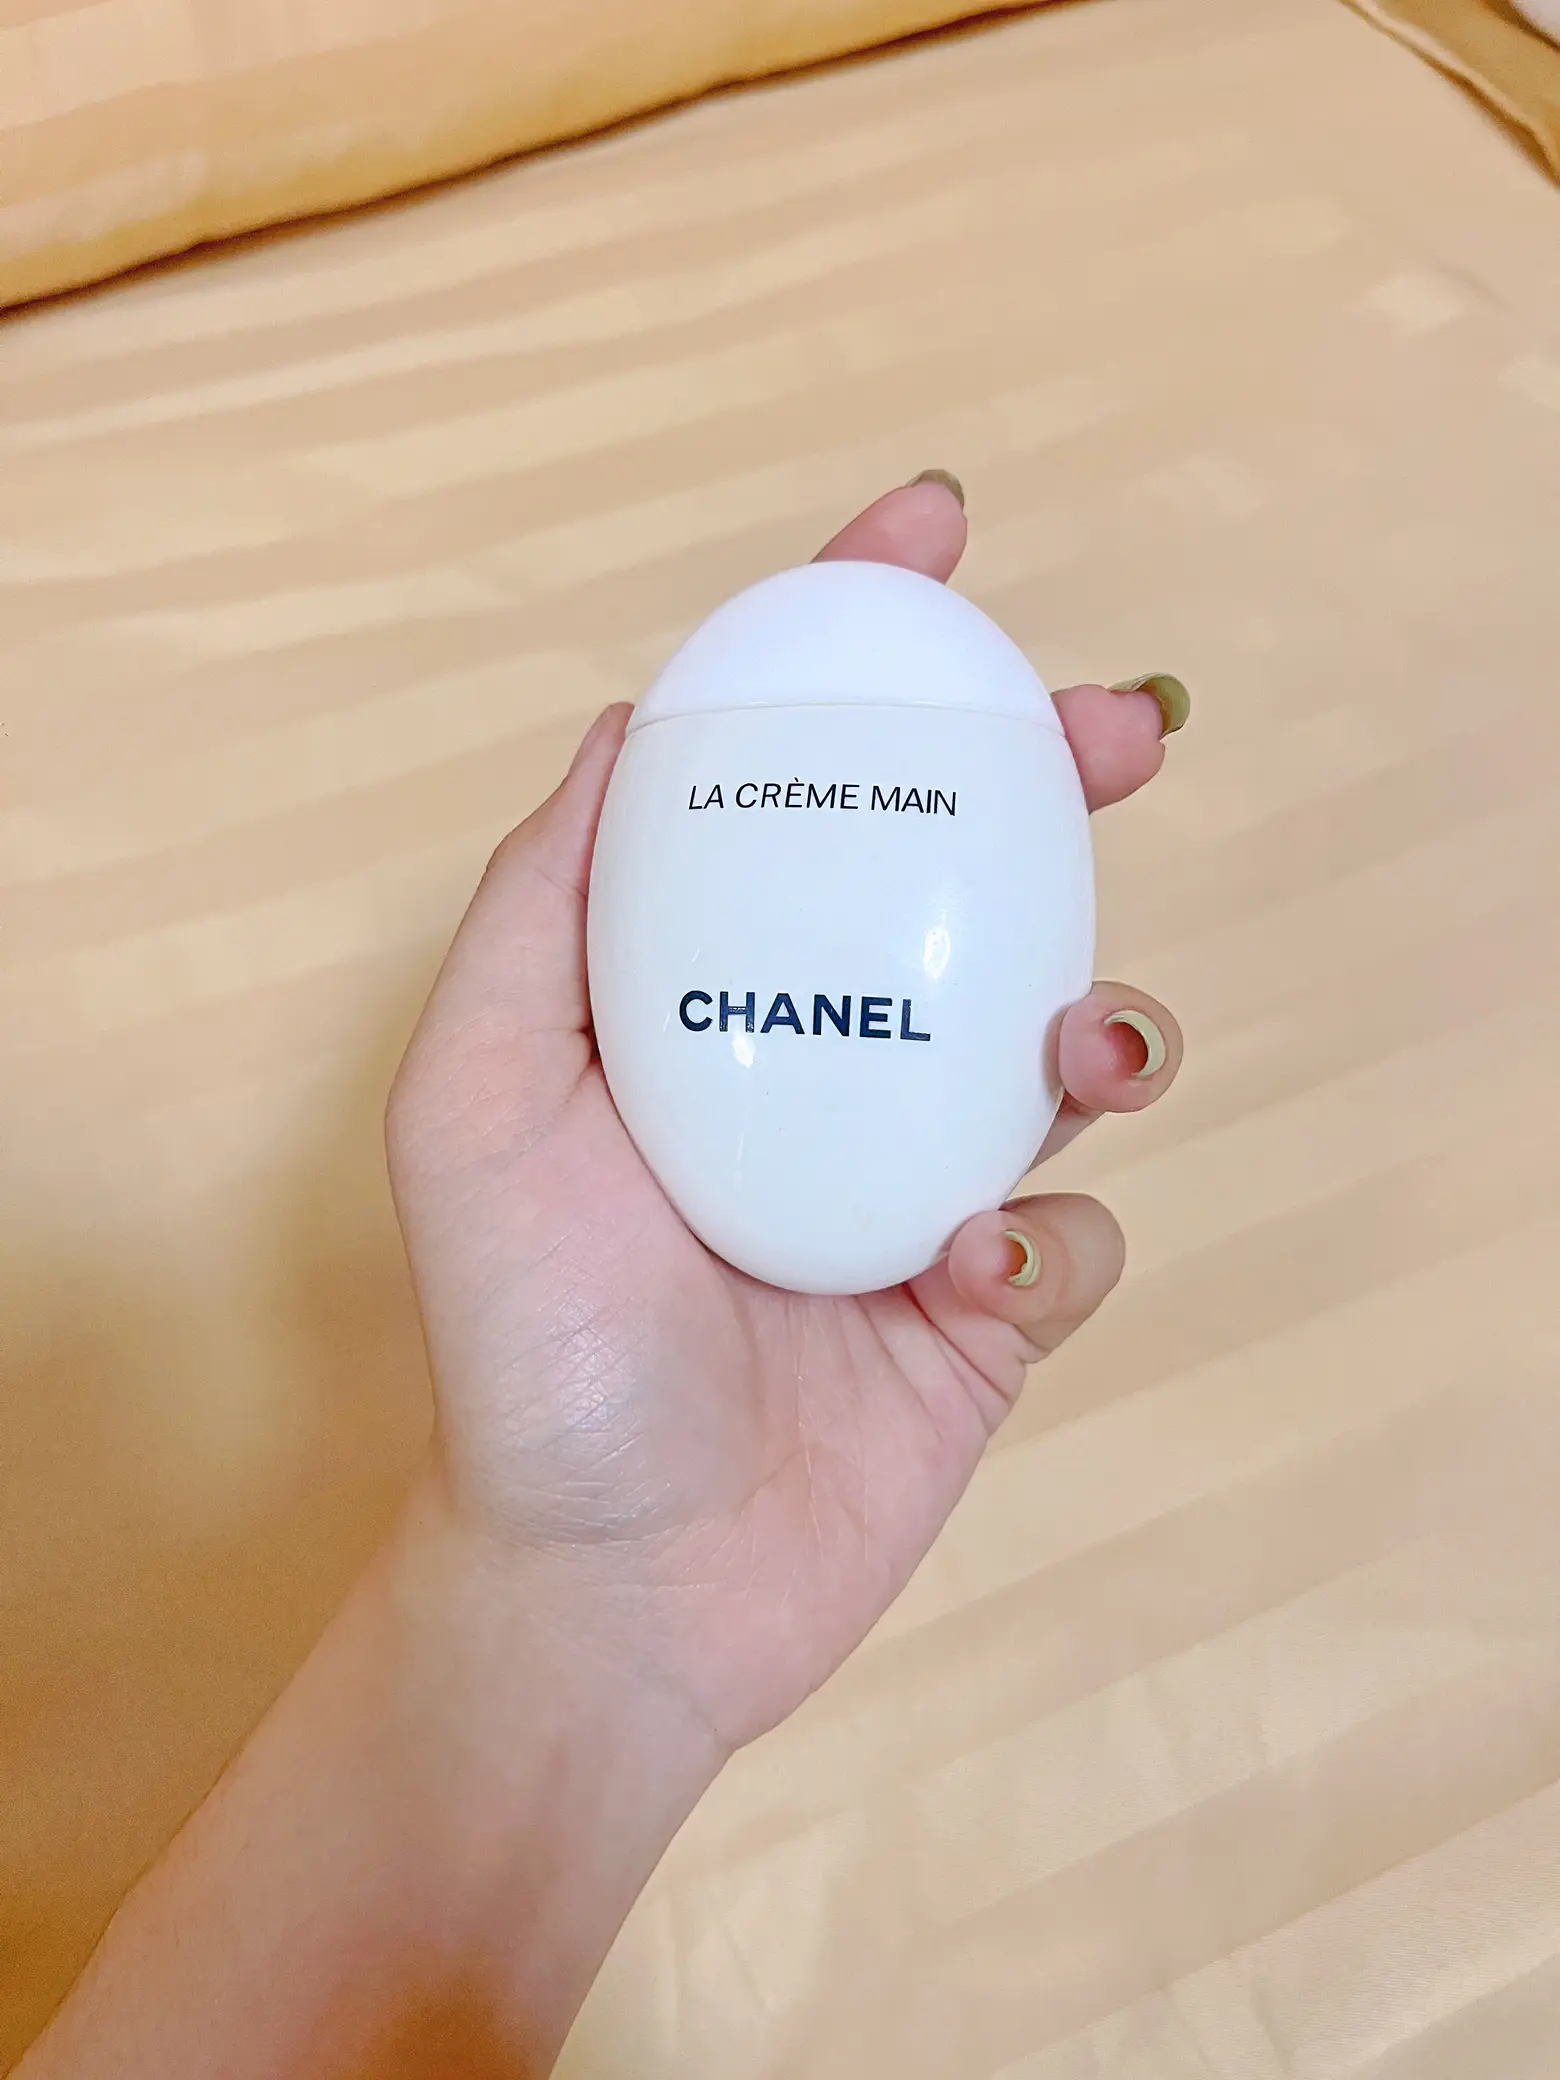 Candy Crush: La Crème Main by CHANEL – The Candy Perfume Boy